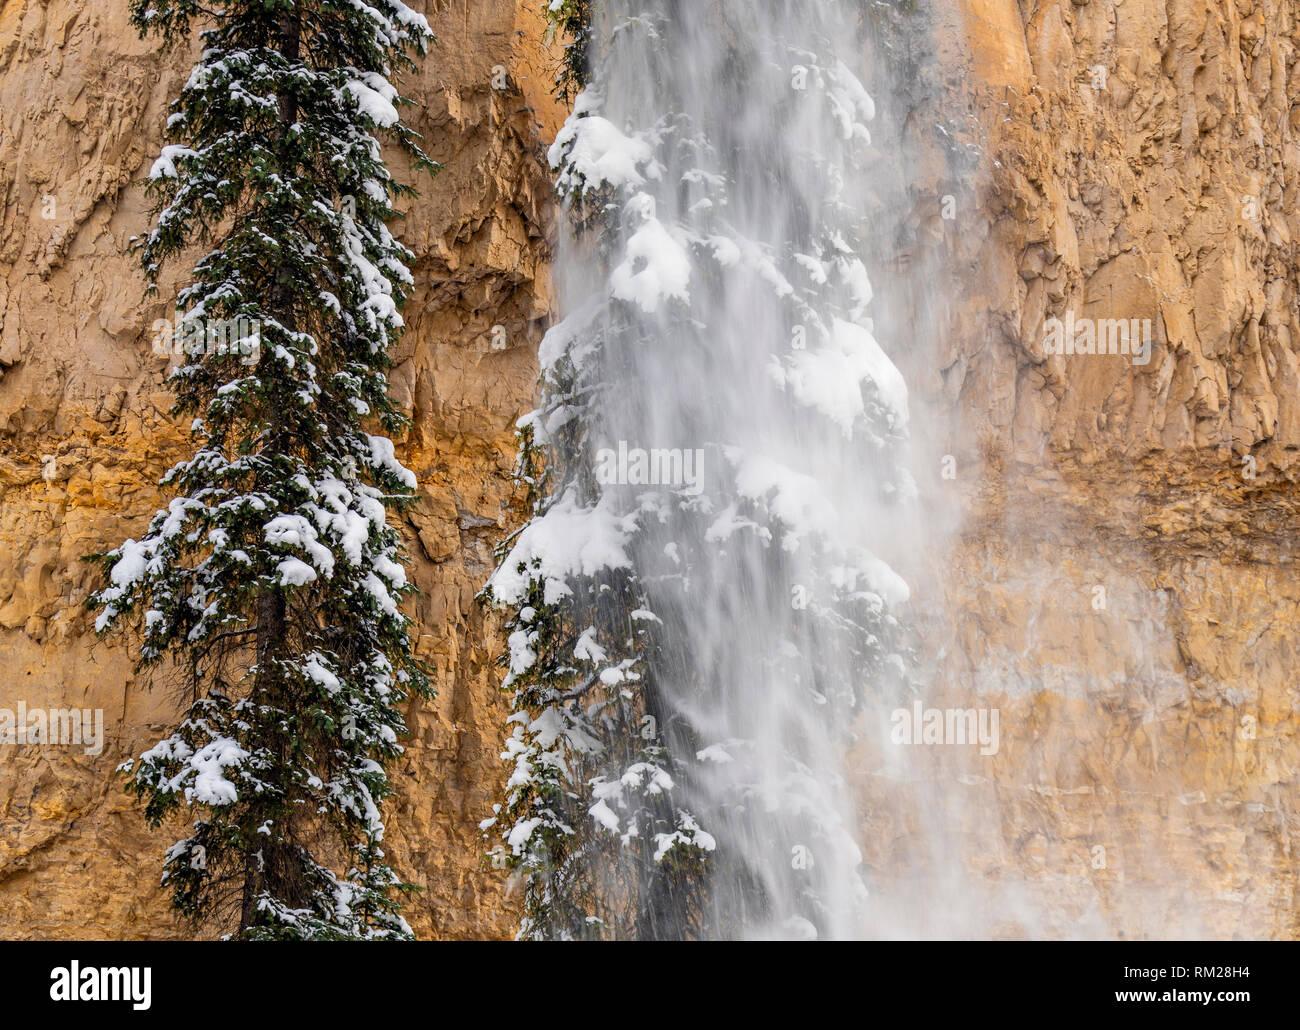 WY03660-00...WYOMING -- Smow falling of trees in Pebble Creek Canyon of Yellowstone National Park. Stock Photo